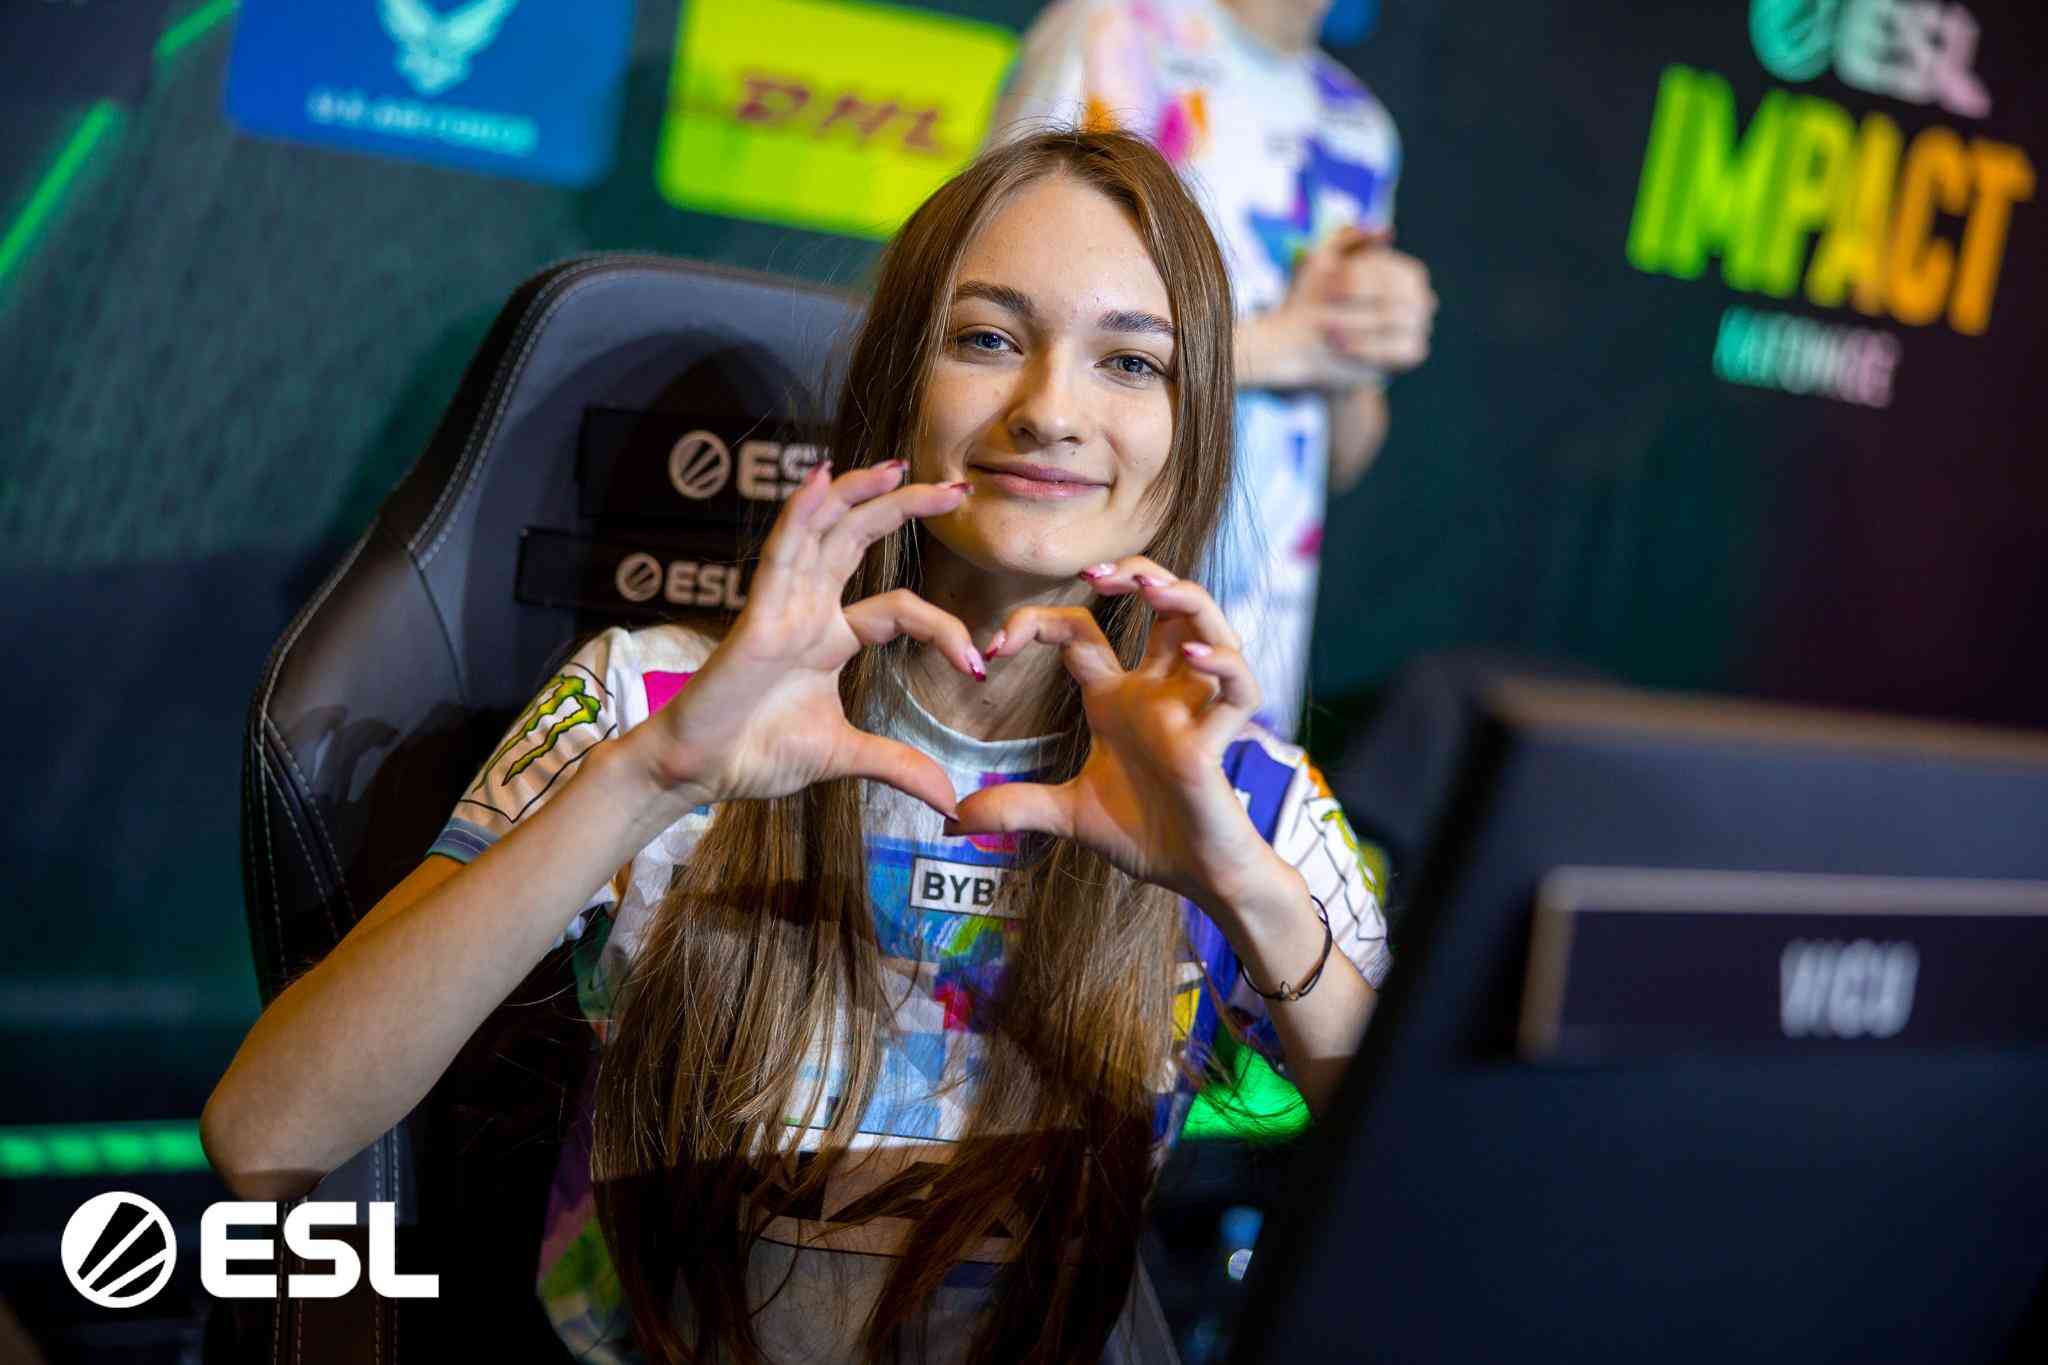 Navi Javelins IGL, Wiktoria "vicu" Janicka, makes a heart with her hands for the camera ahead of a game at ESL Katowice